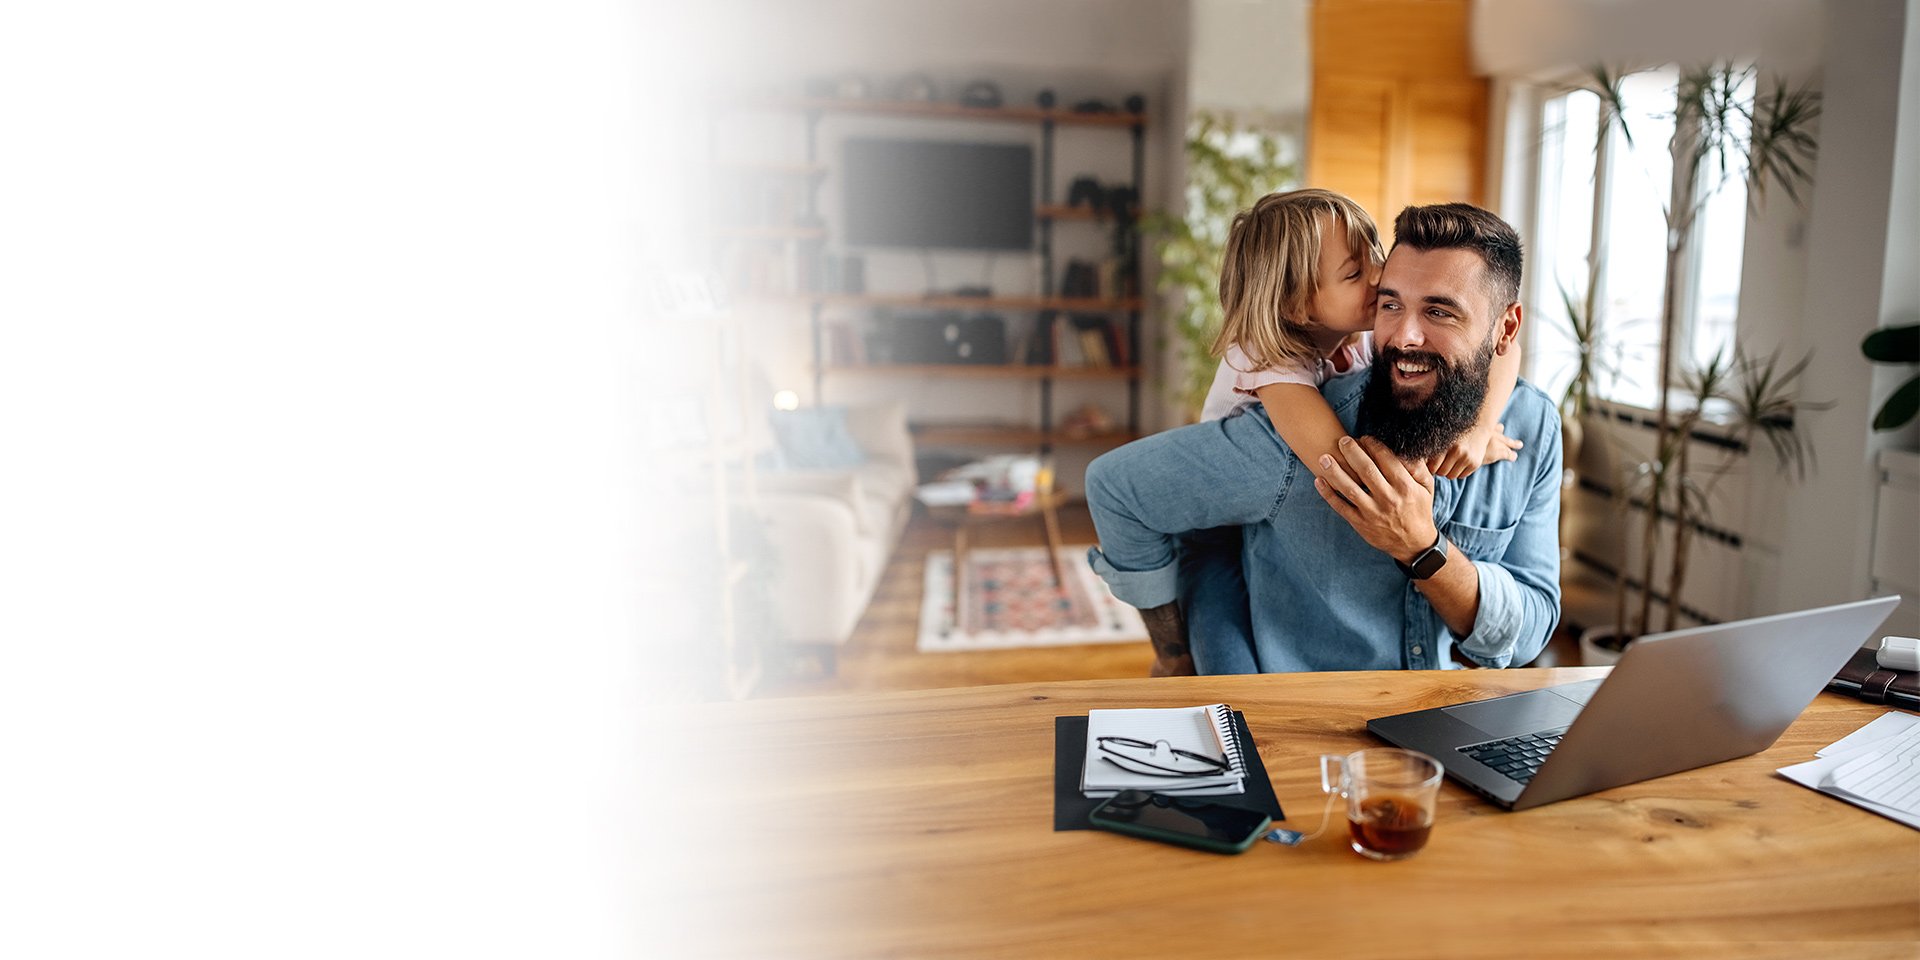 A daughter and her dad hugging at his desk at home